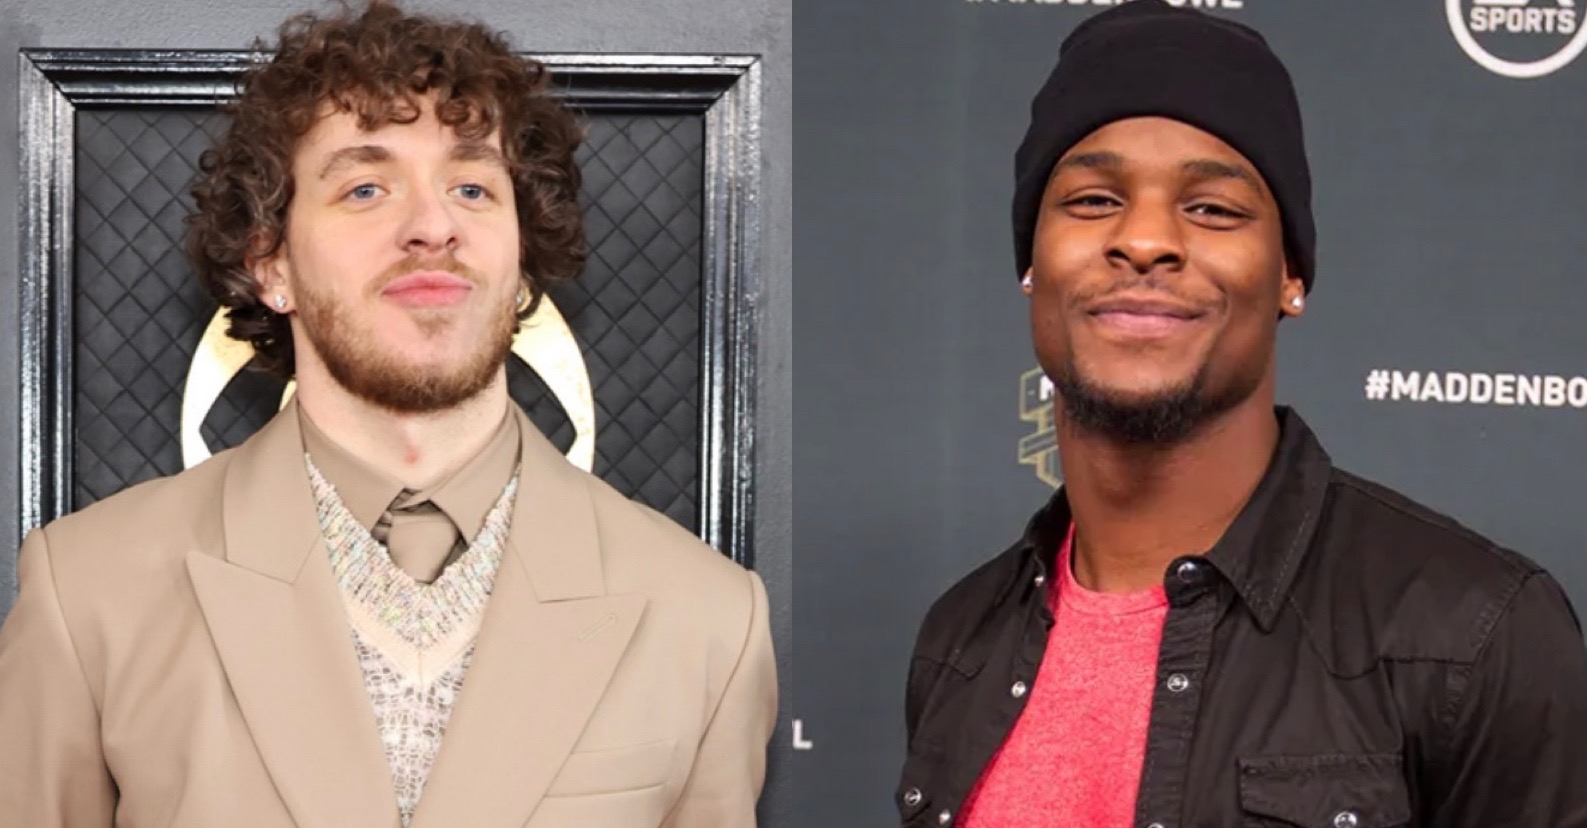 Jack Harlow Rejects Le'Veon Bell's Feature Request Twice